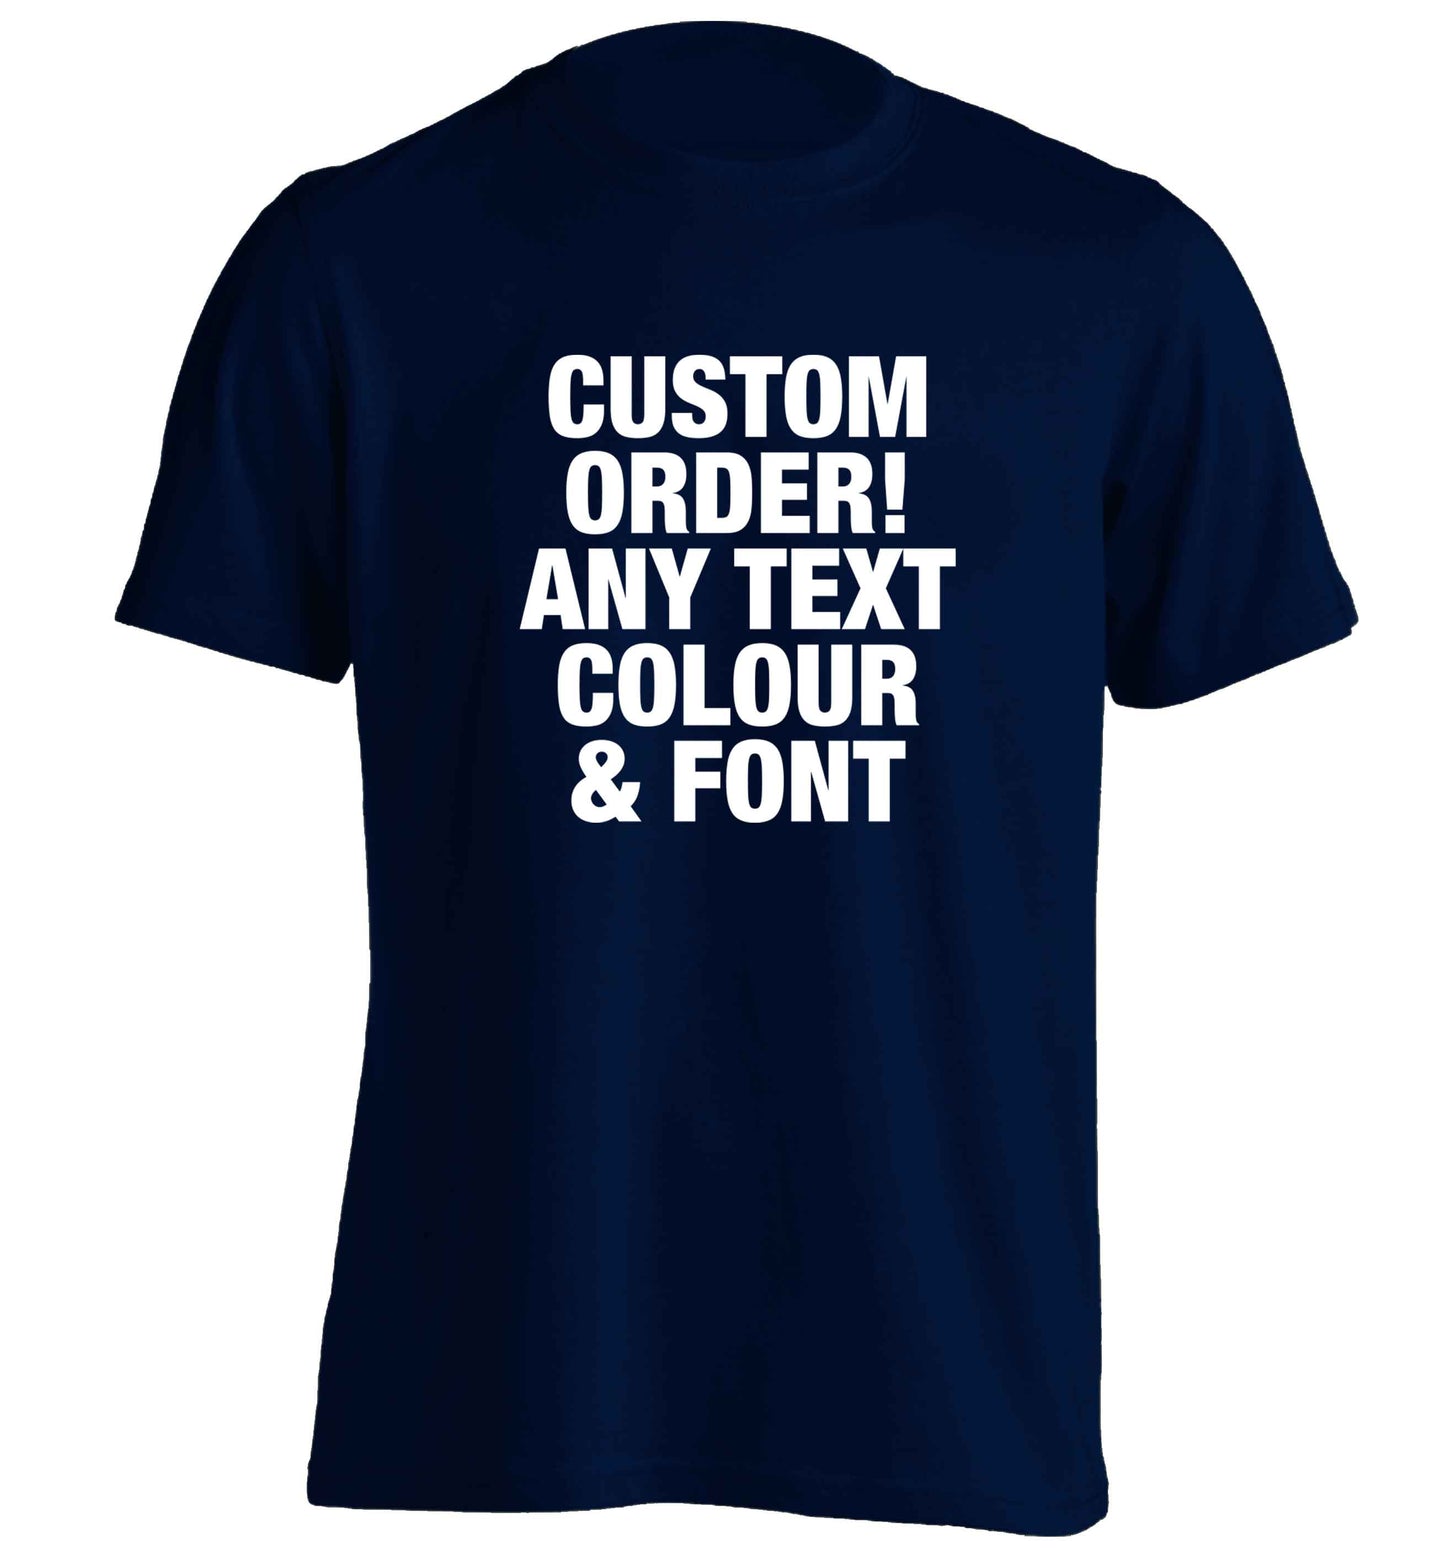 Custom order any text colour and font adults unisex navy Tshirt 2XL